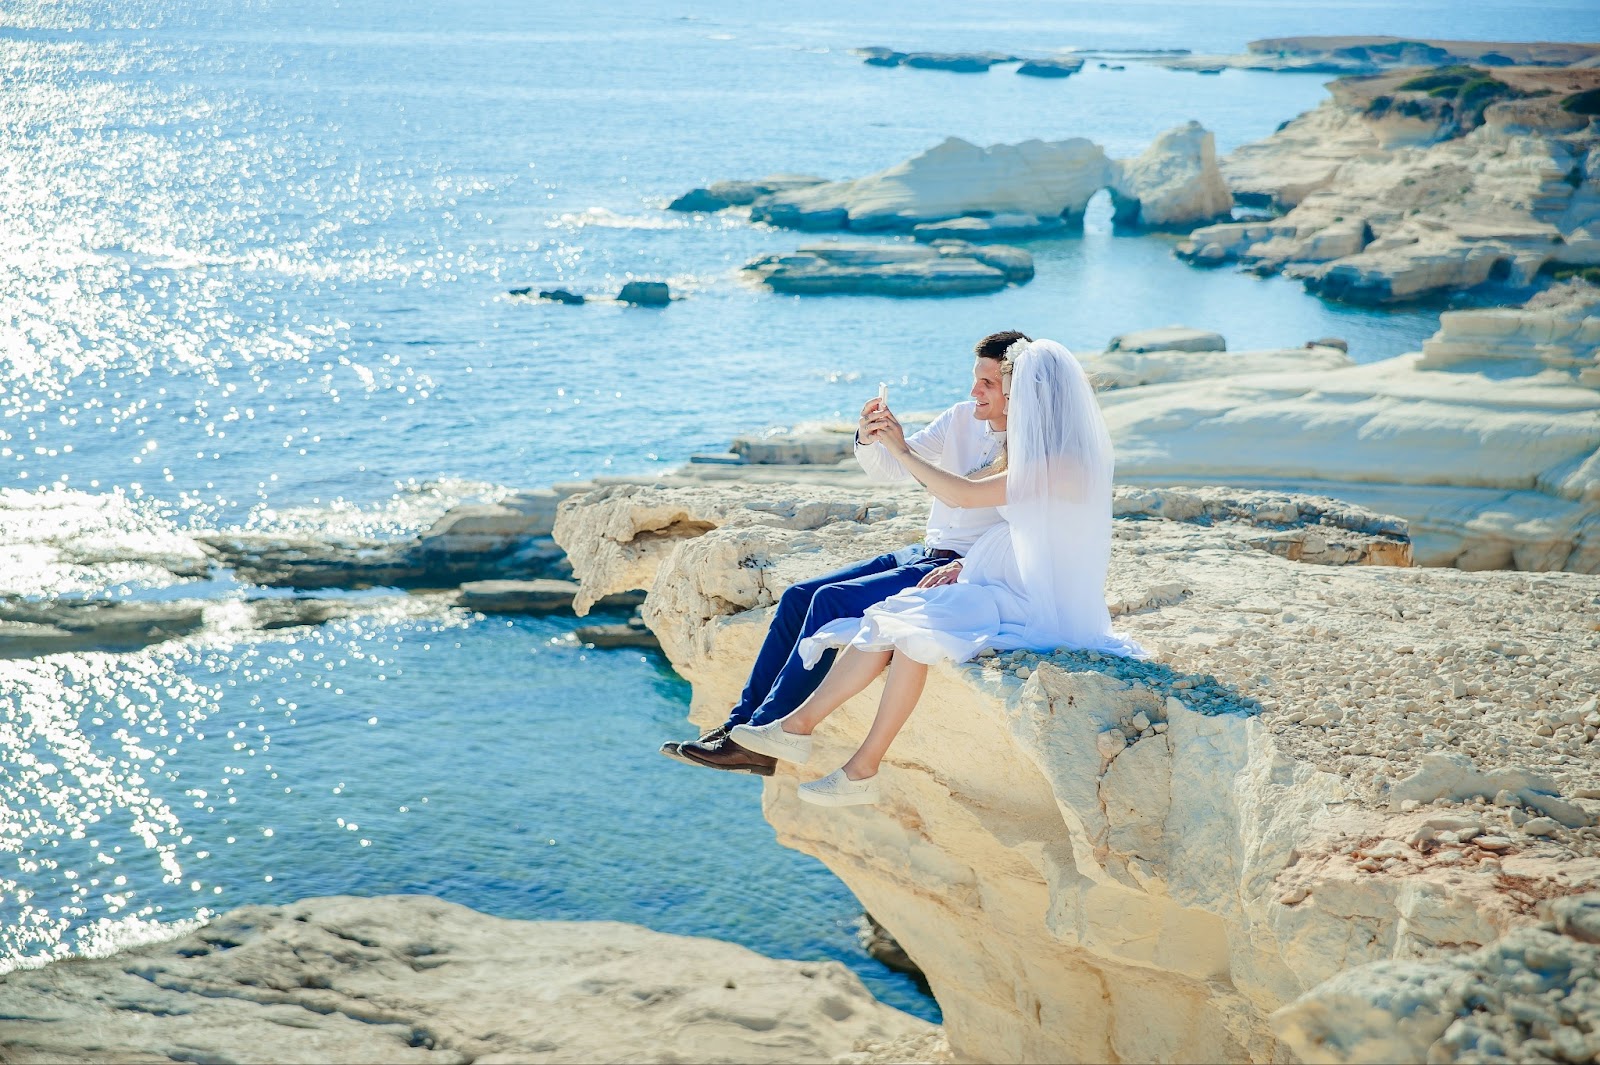 A symbolic ceremony overlooking a scenic landscape, creating a beautiful backdrop for the wedding.